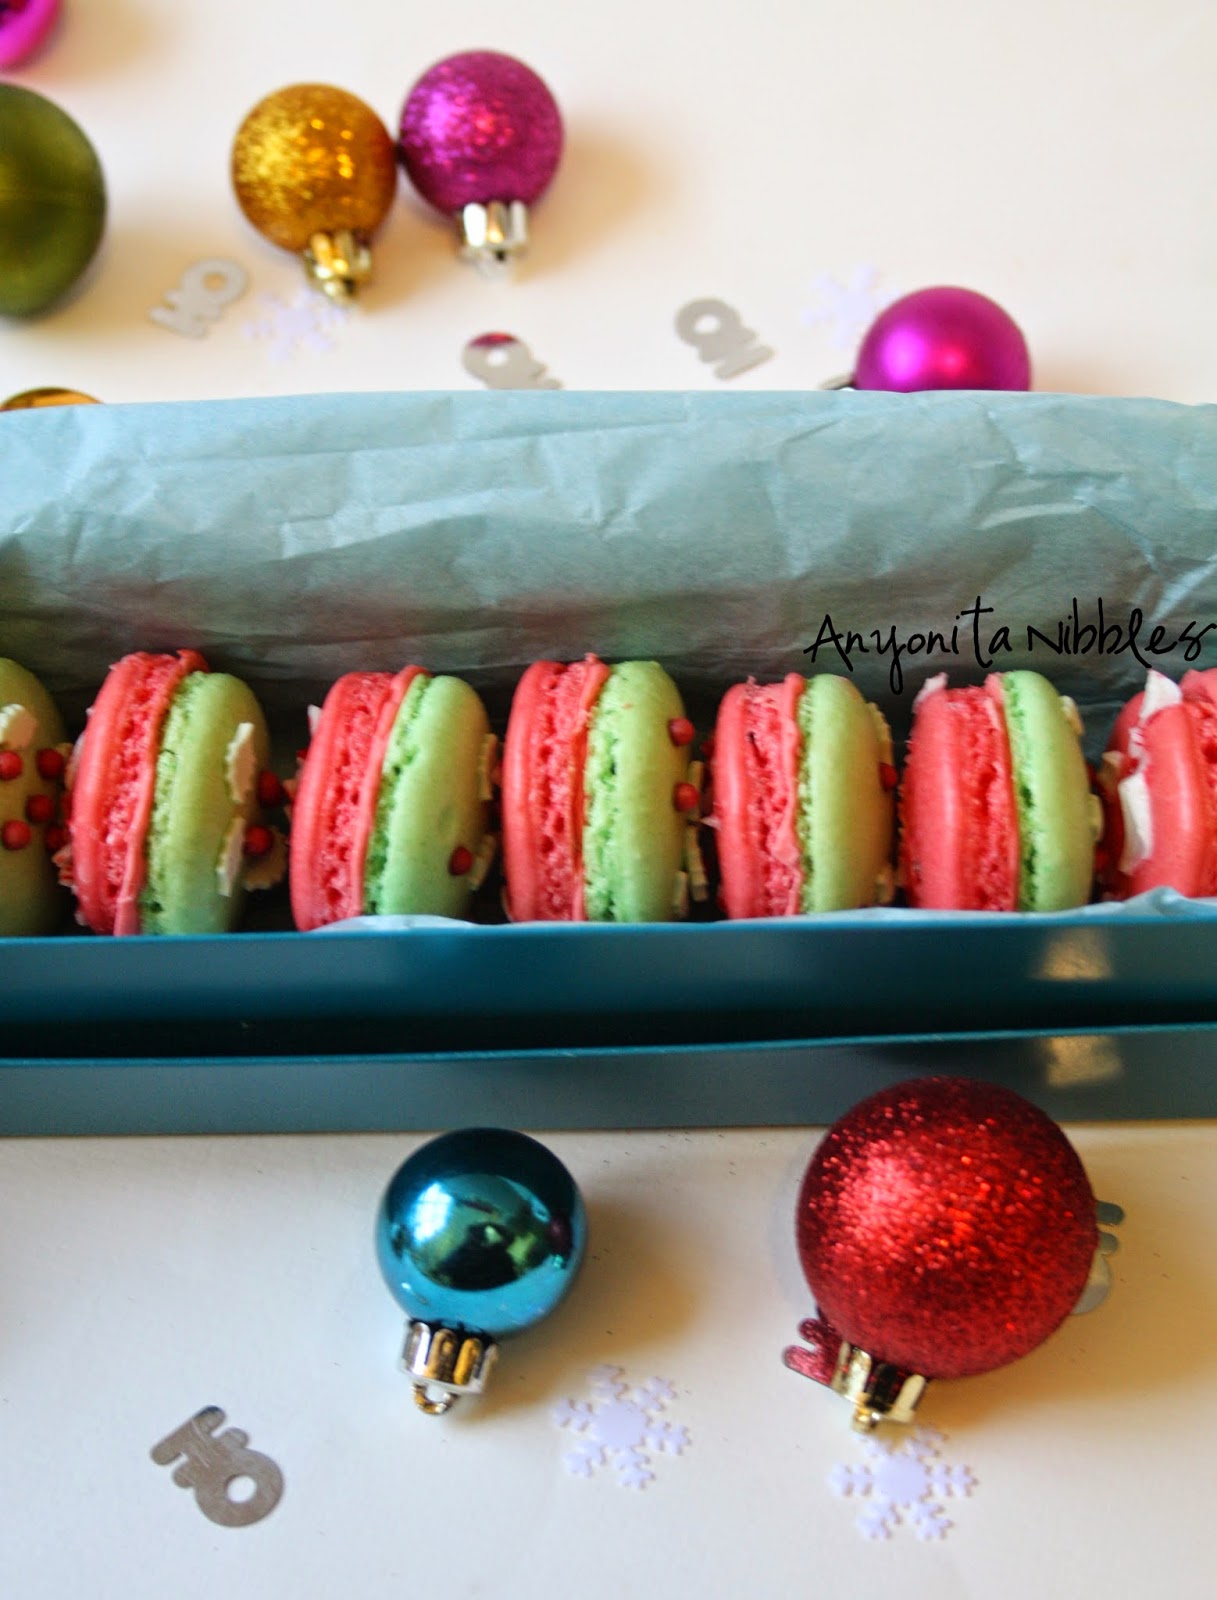 Double Peppermint French Macarons in Gift Box from Anyonita-nibbles.co.uk